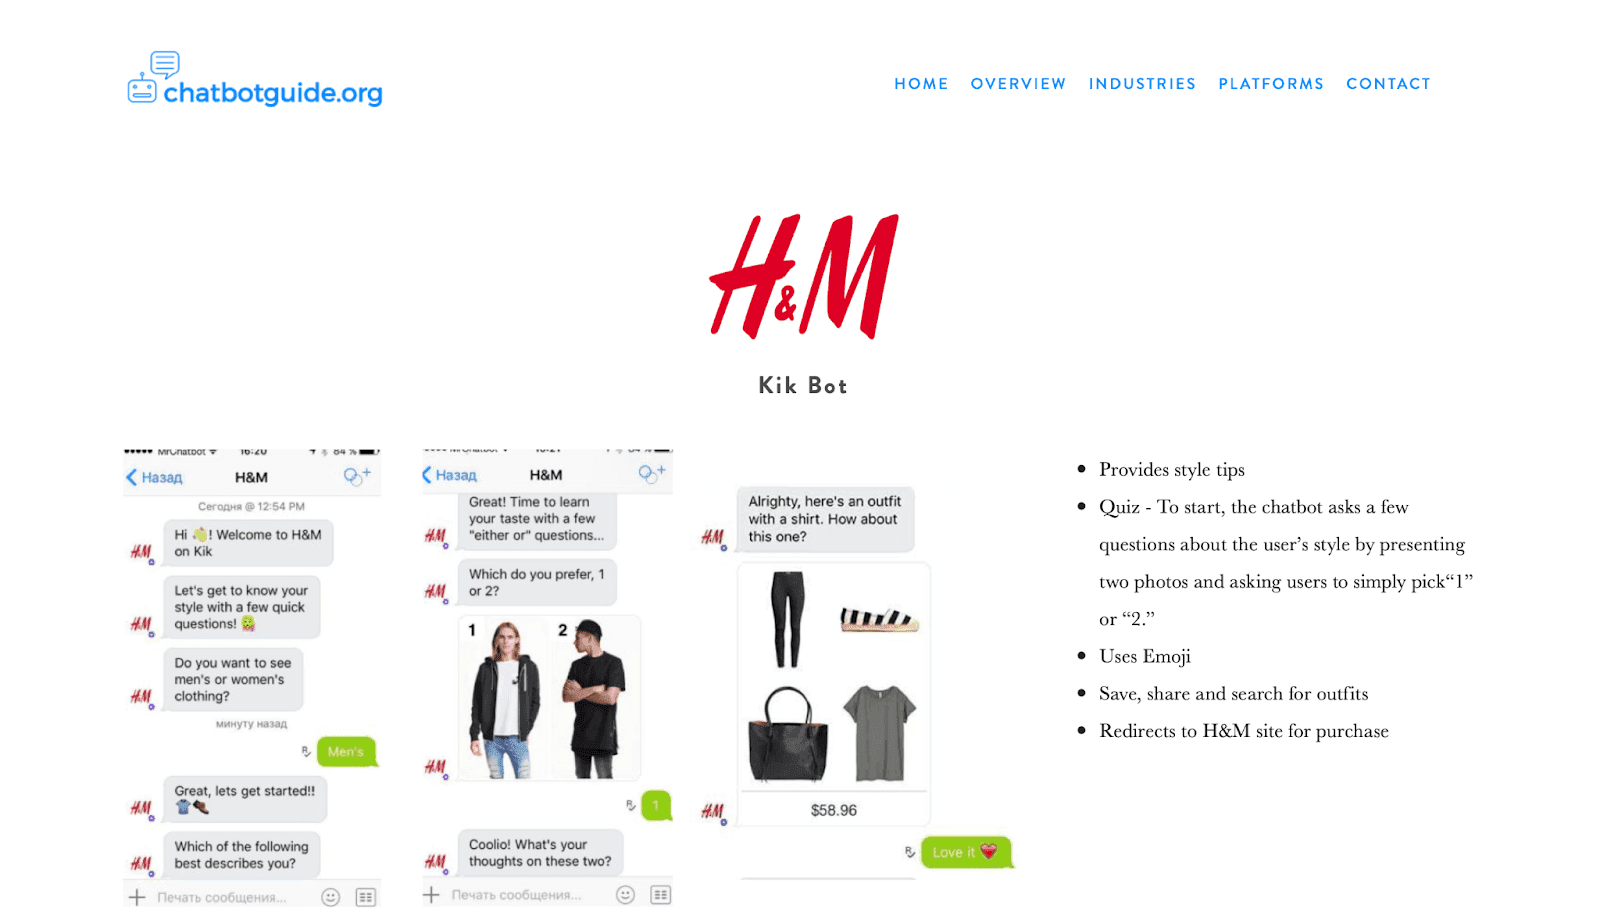 H&M Kik Bot guide by Chatbotguide.org showing steps to effectively use Kik Bot